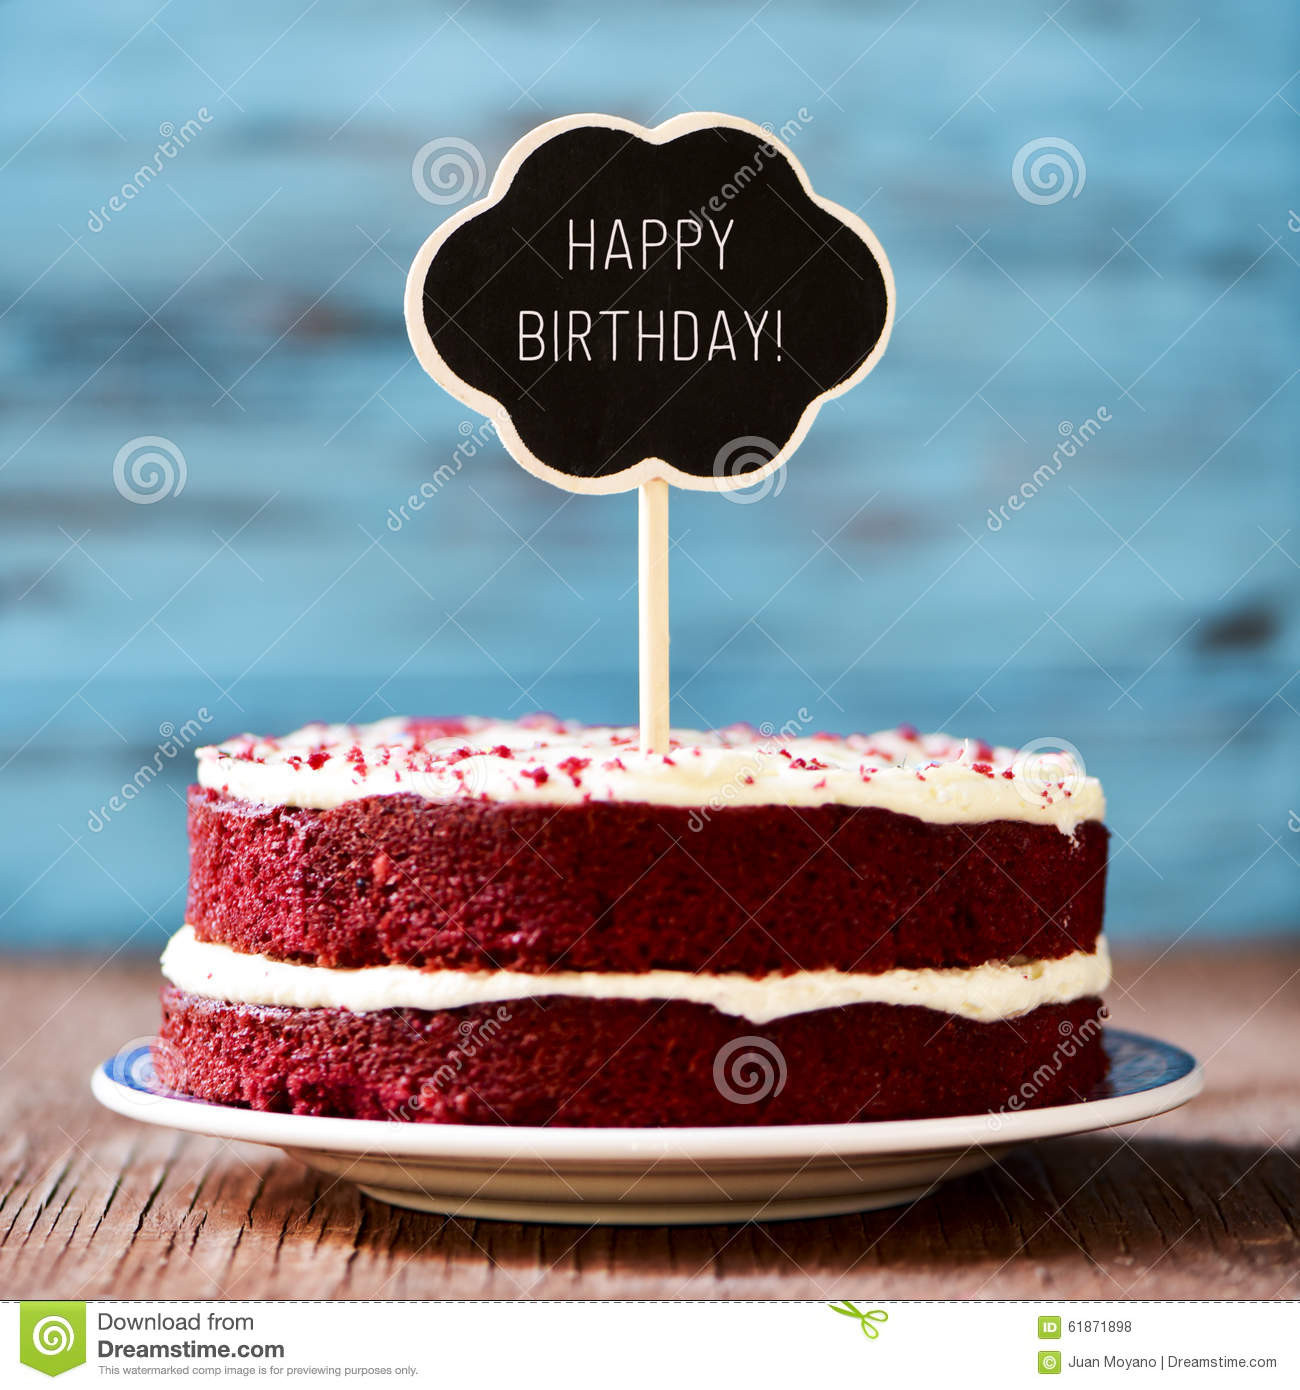 Happy Birthday Cake Text
 Chalkboard With The Text Happy Birthday In A Cake Stock